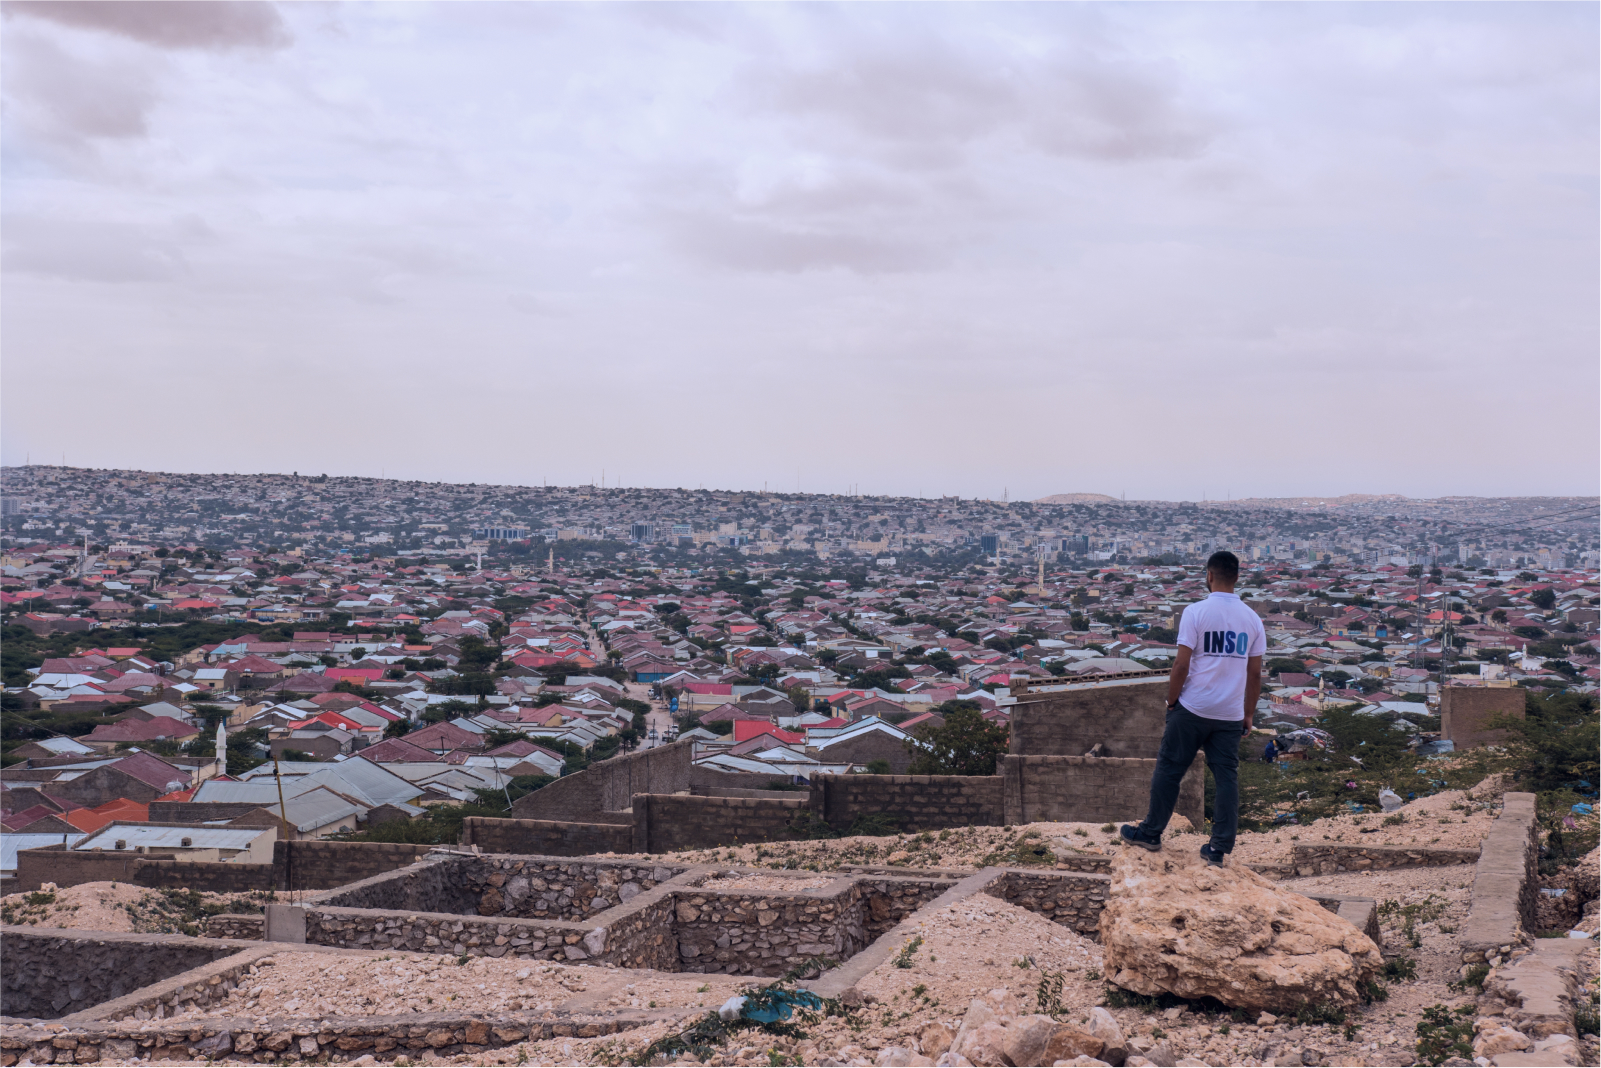 A staff member looks over Hargeisa. Credit: H. Abdiraman/INSO